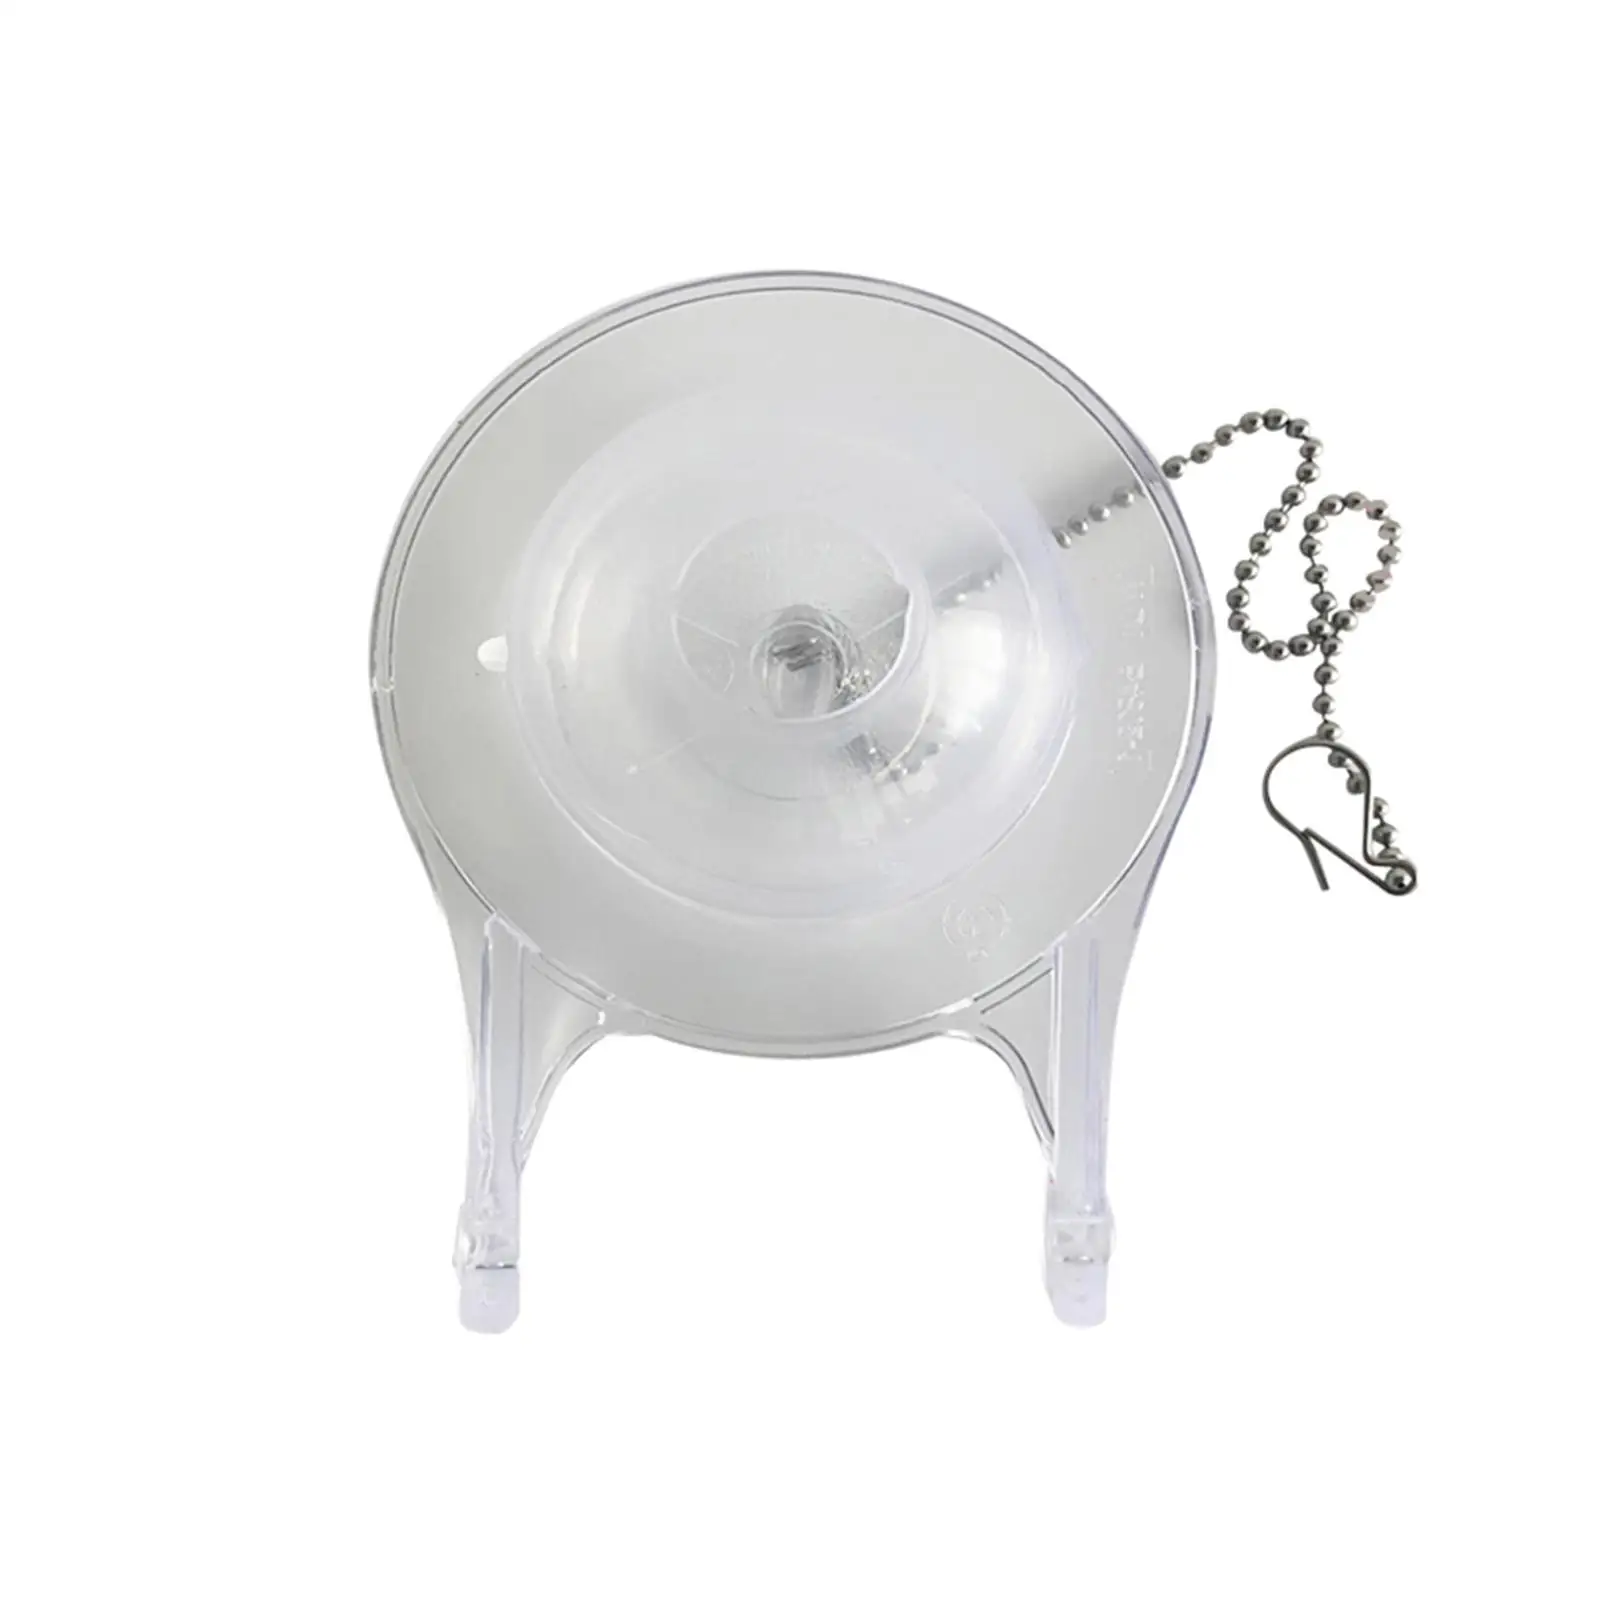 Toilet Flapper Toilet Tank Stop Cover with Stainless Steel Chain High images - 6